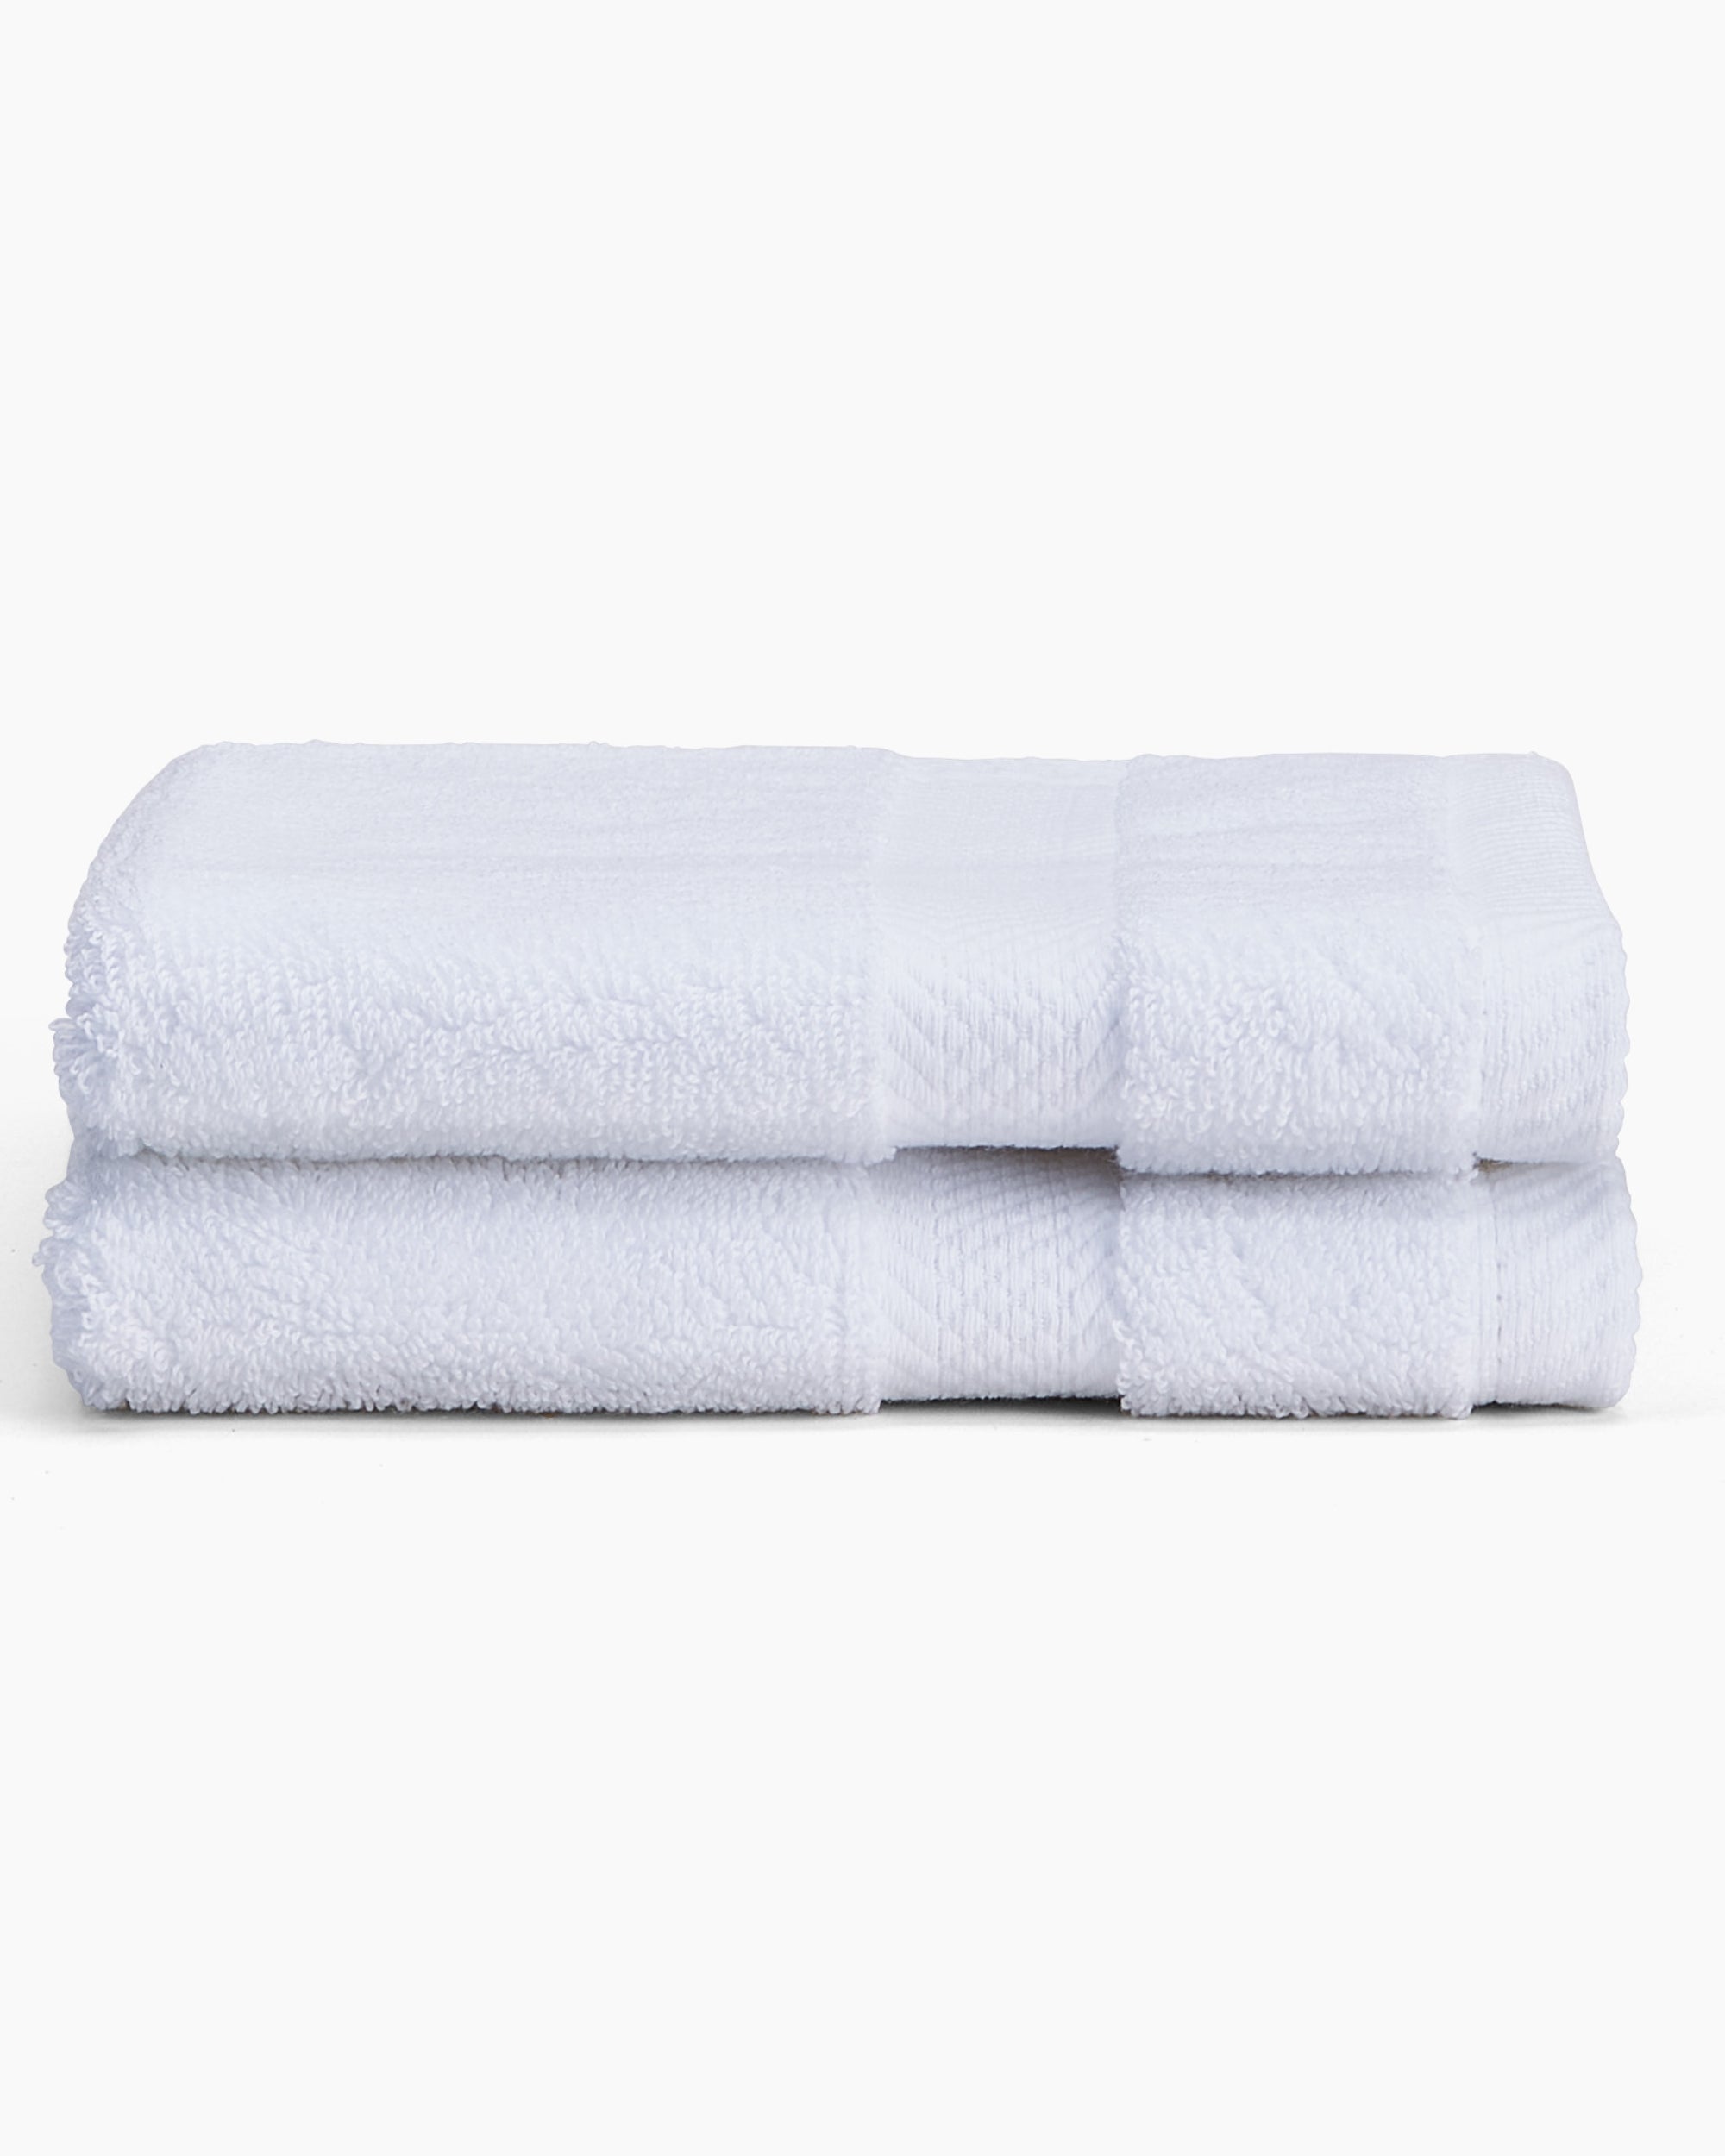 American made washcloths with the softest cotton grown in the USA